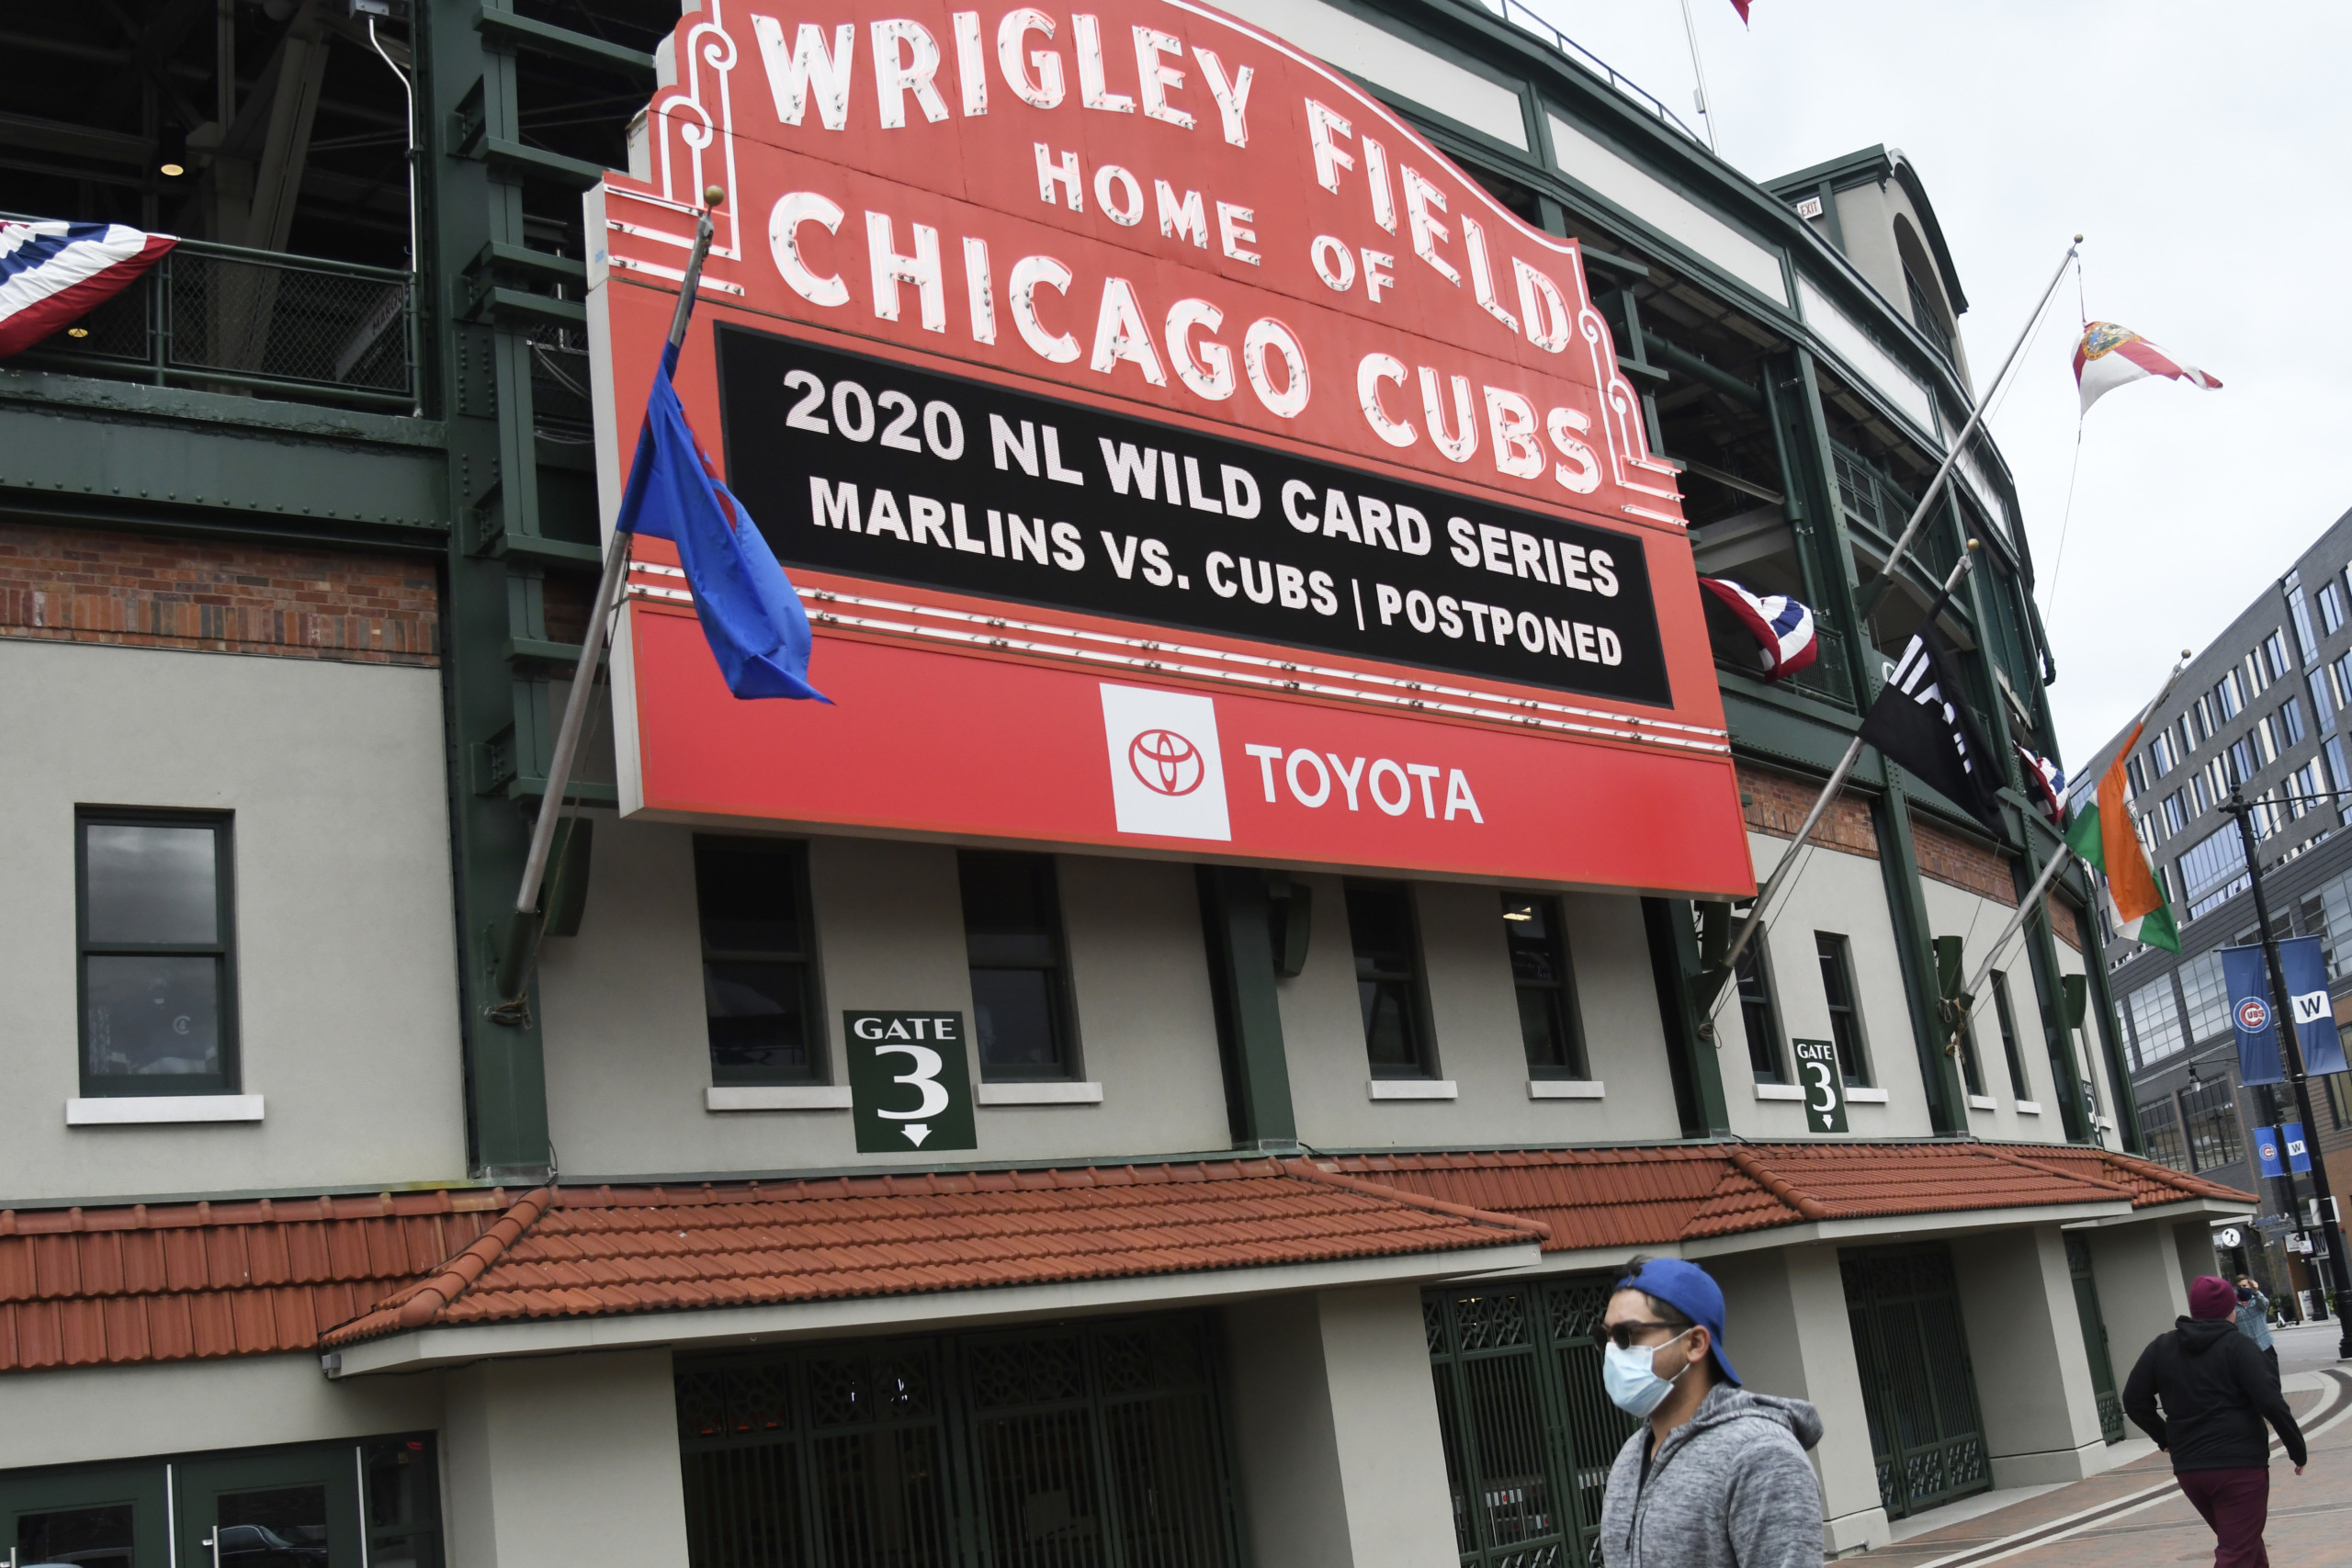 Oct 1, 2020; Chicago, Illinois, USA; A general view outside of Wrigley Field announcing the game between the Chicago Cubs and the Miami Marlins was cancelled. Mandatory Credit: